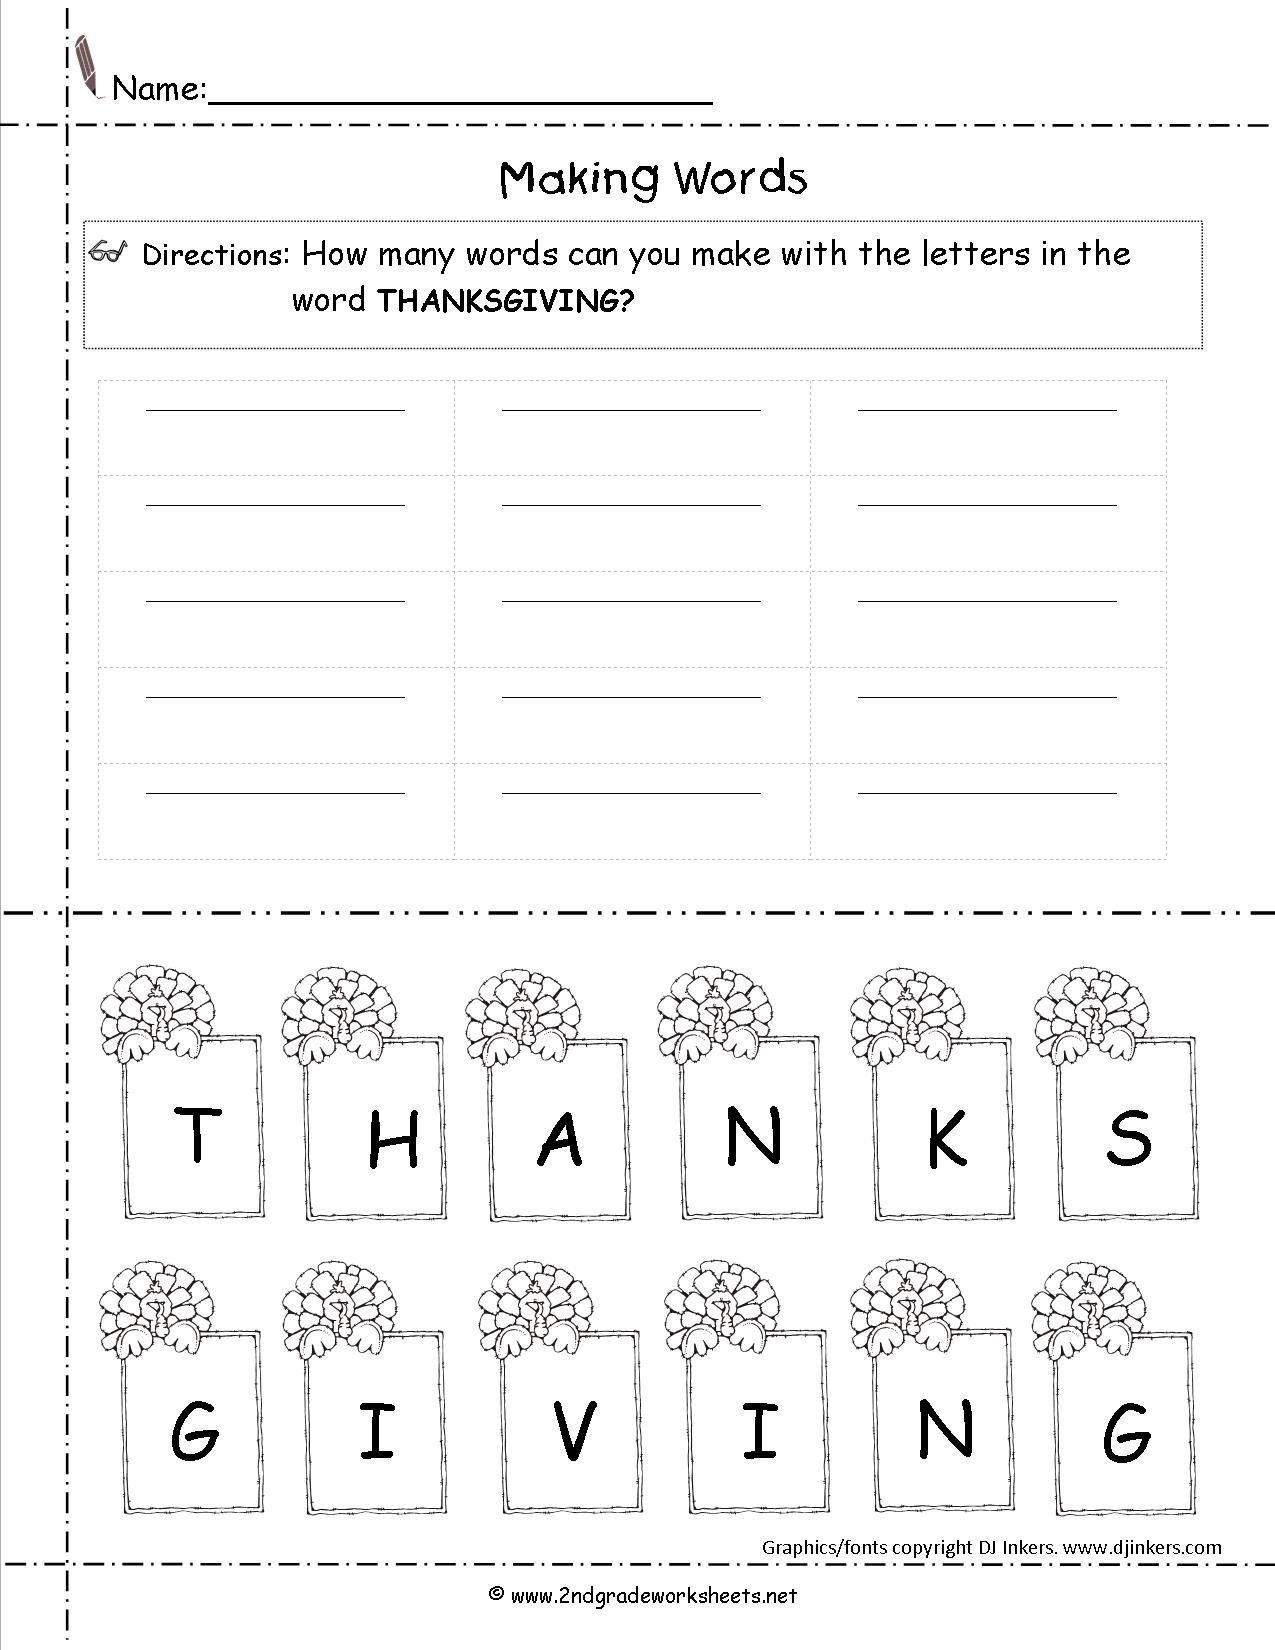 Thanksgiving Printouts And Worksheets Also Free Printable Thanksgiving Math Worksheets For 3Rd Grade